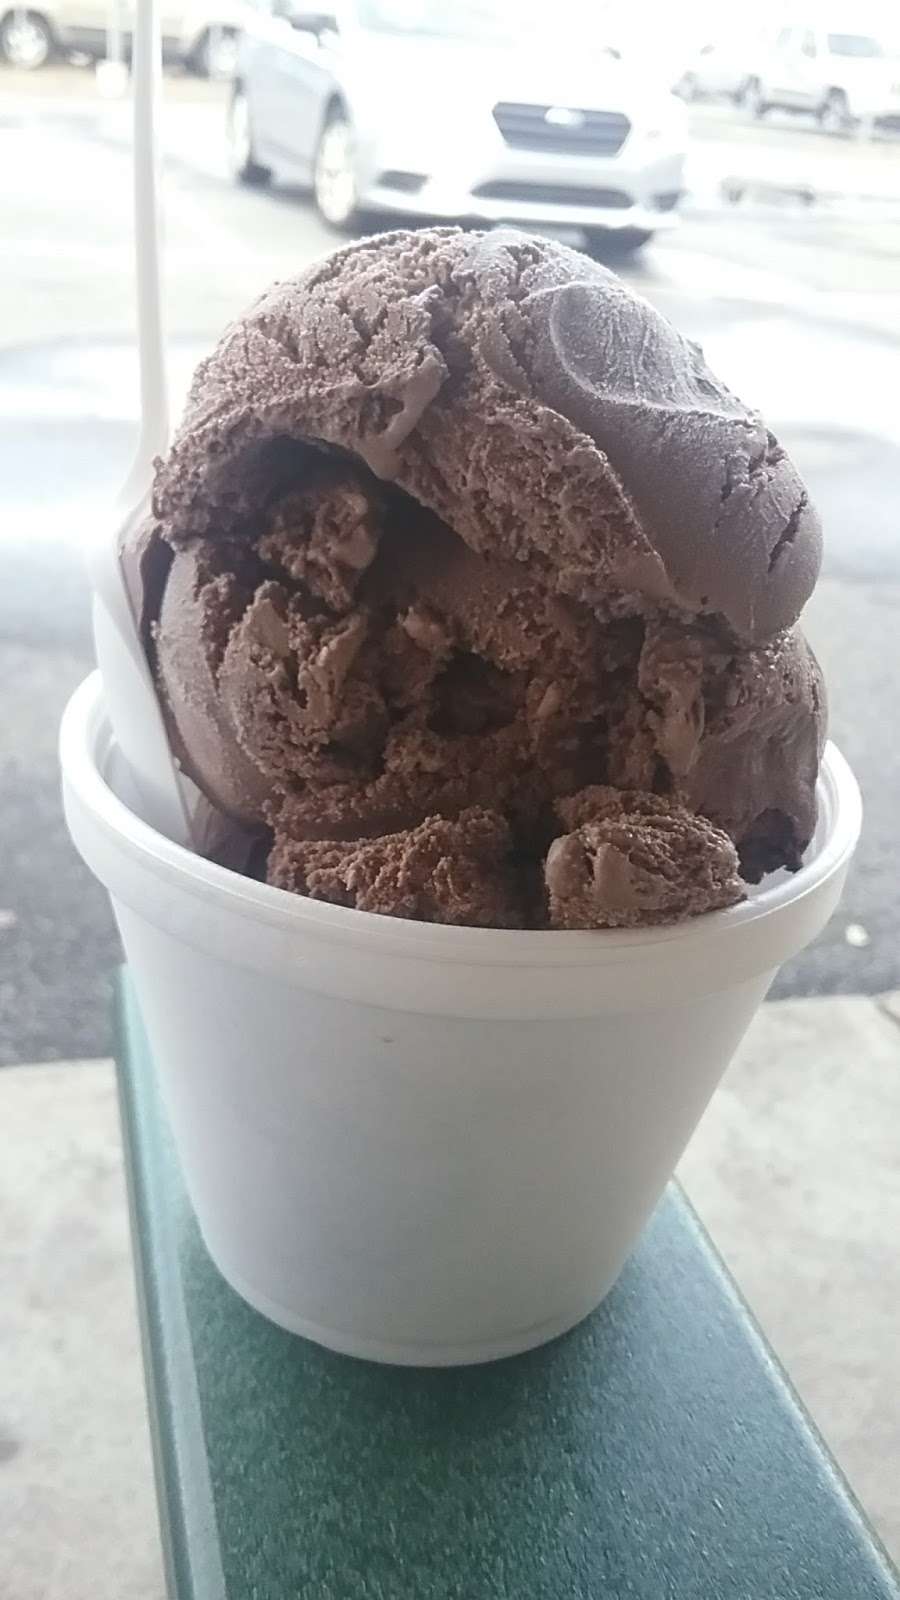 Piccs Ice Cream | 938 Moosic Rd, Old Forge, PA 18518, USA | Phone: (570) 774-3973